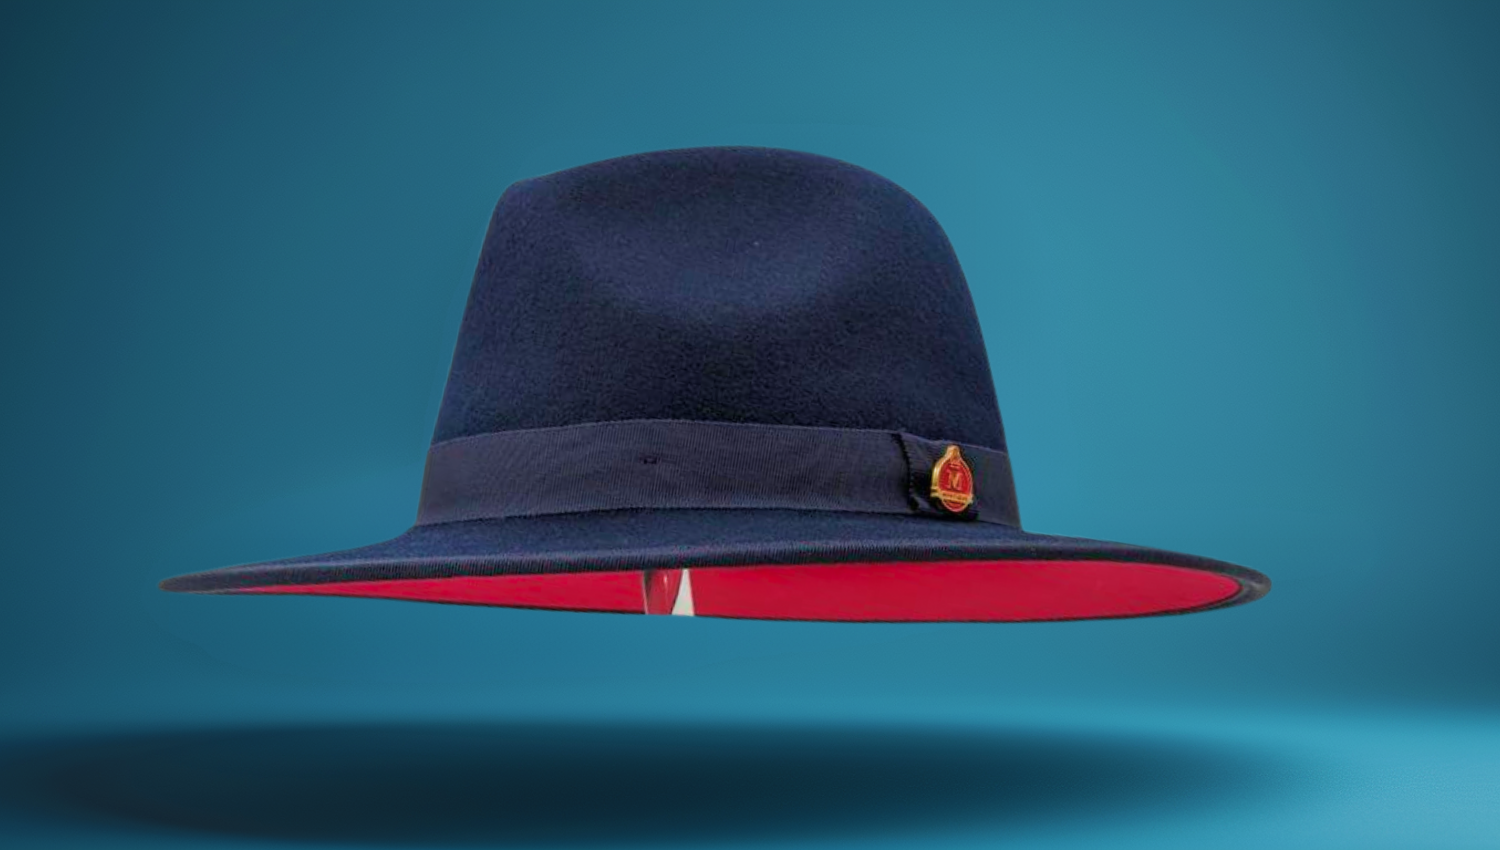 Red Bottom Fedoras: A Bold Statement in Hat Fashion